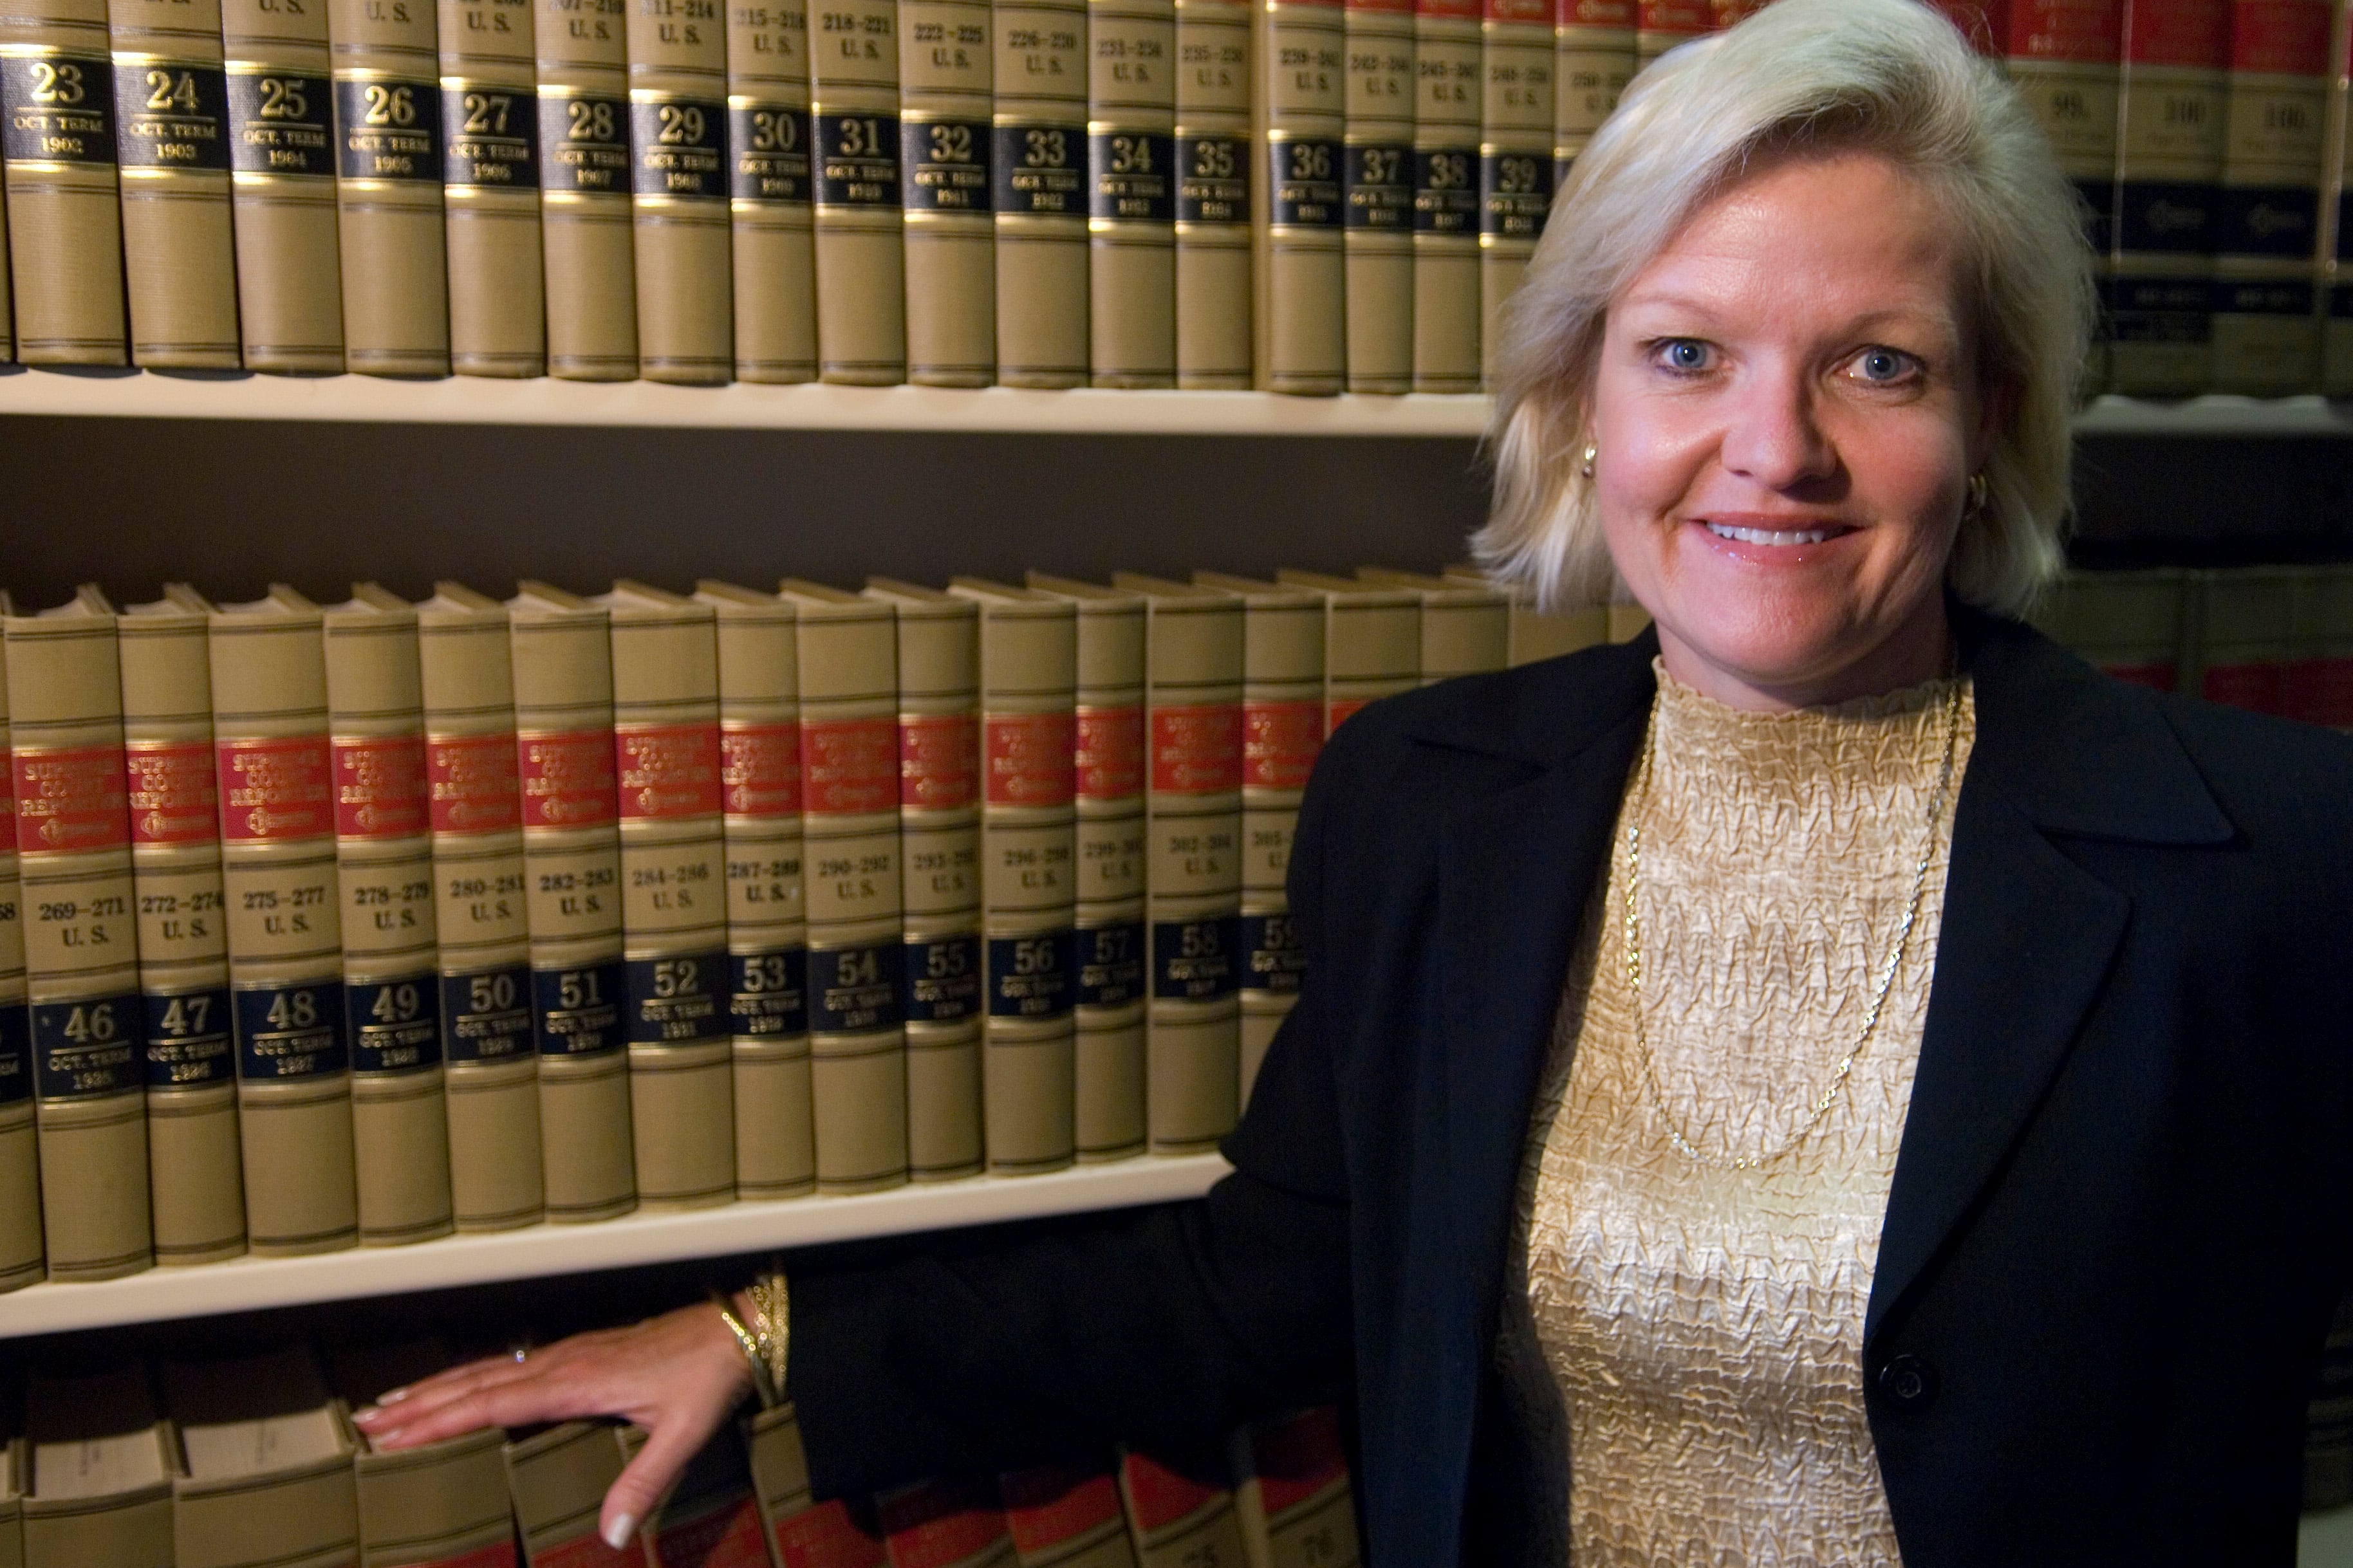 Cleta Mitchell wearing a suit jacket and gold shirt standing before a tall shelf of law books.